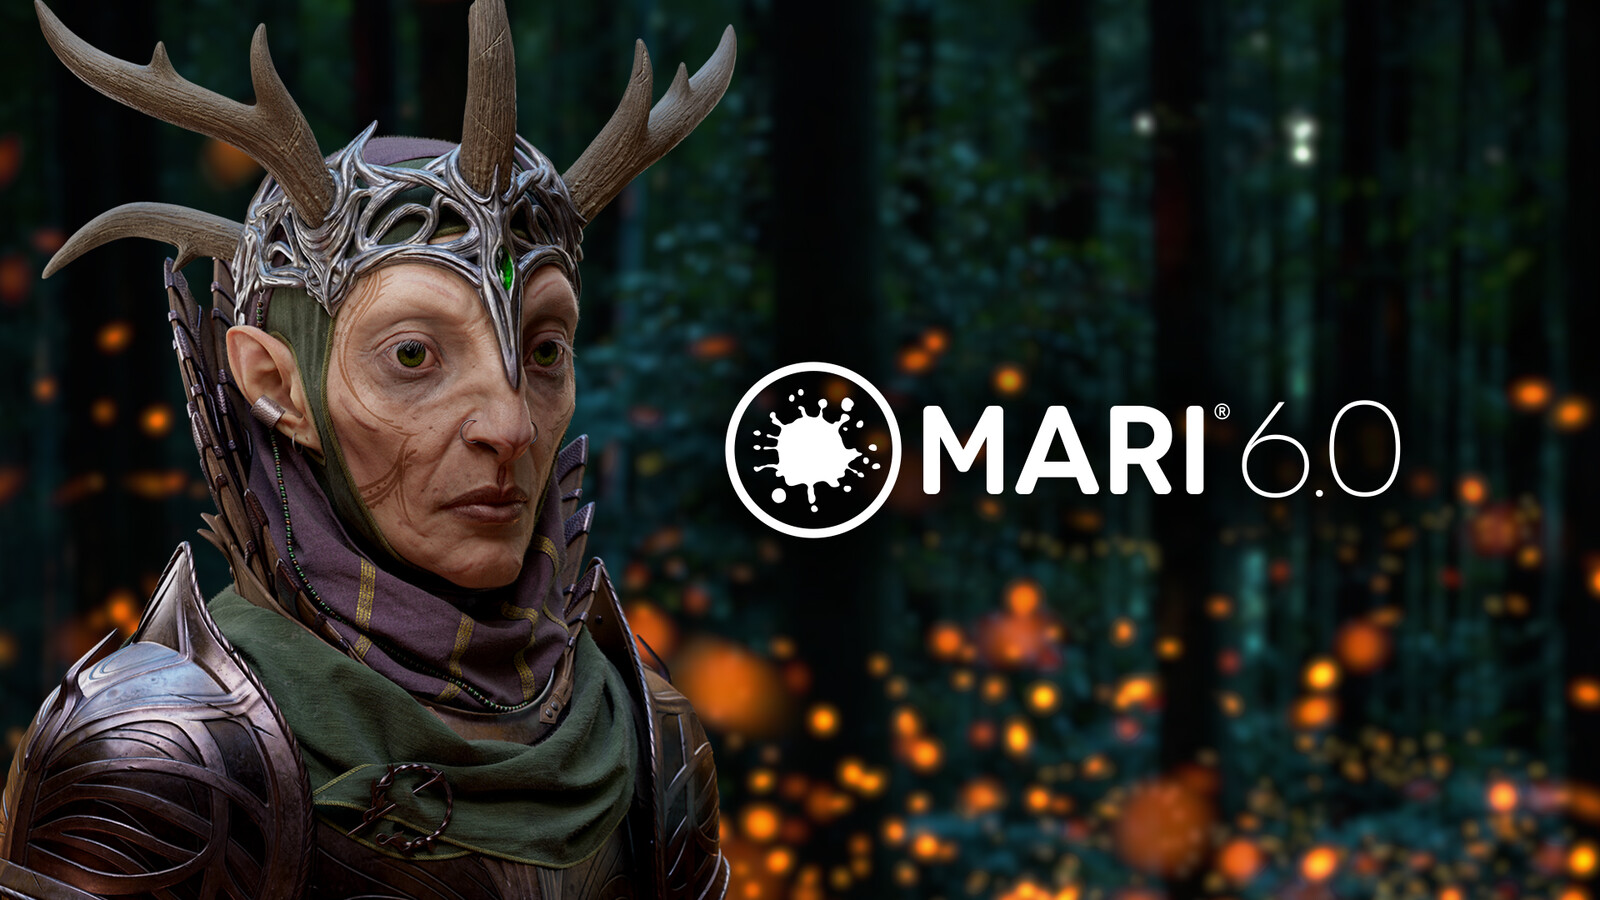 Mari 6 promotional image created by the team at the Foundry